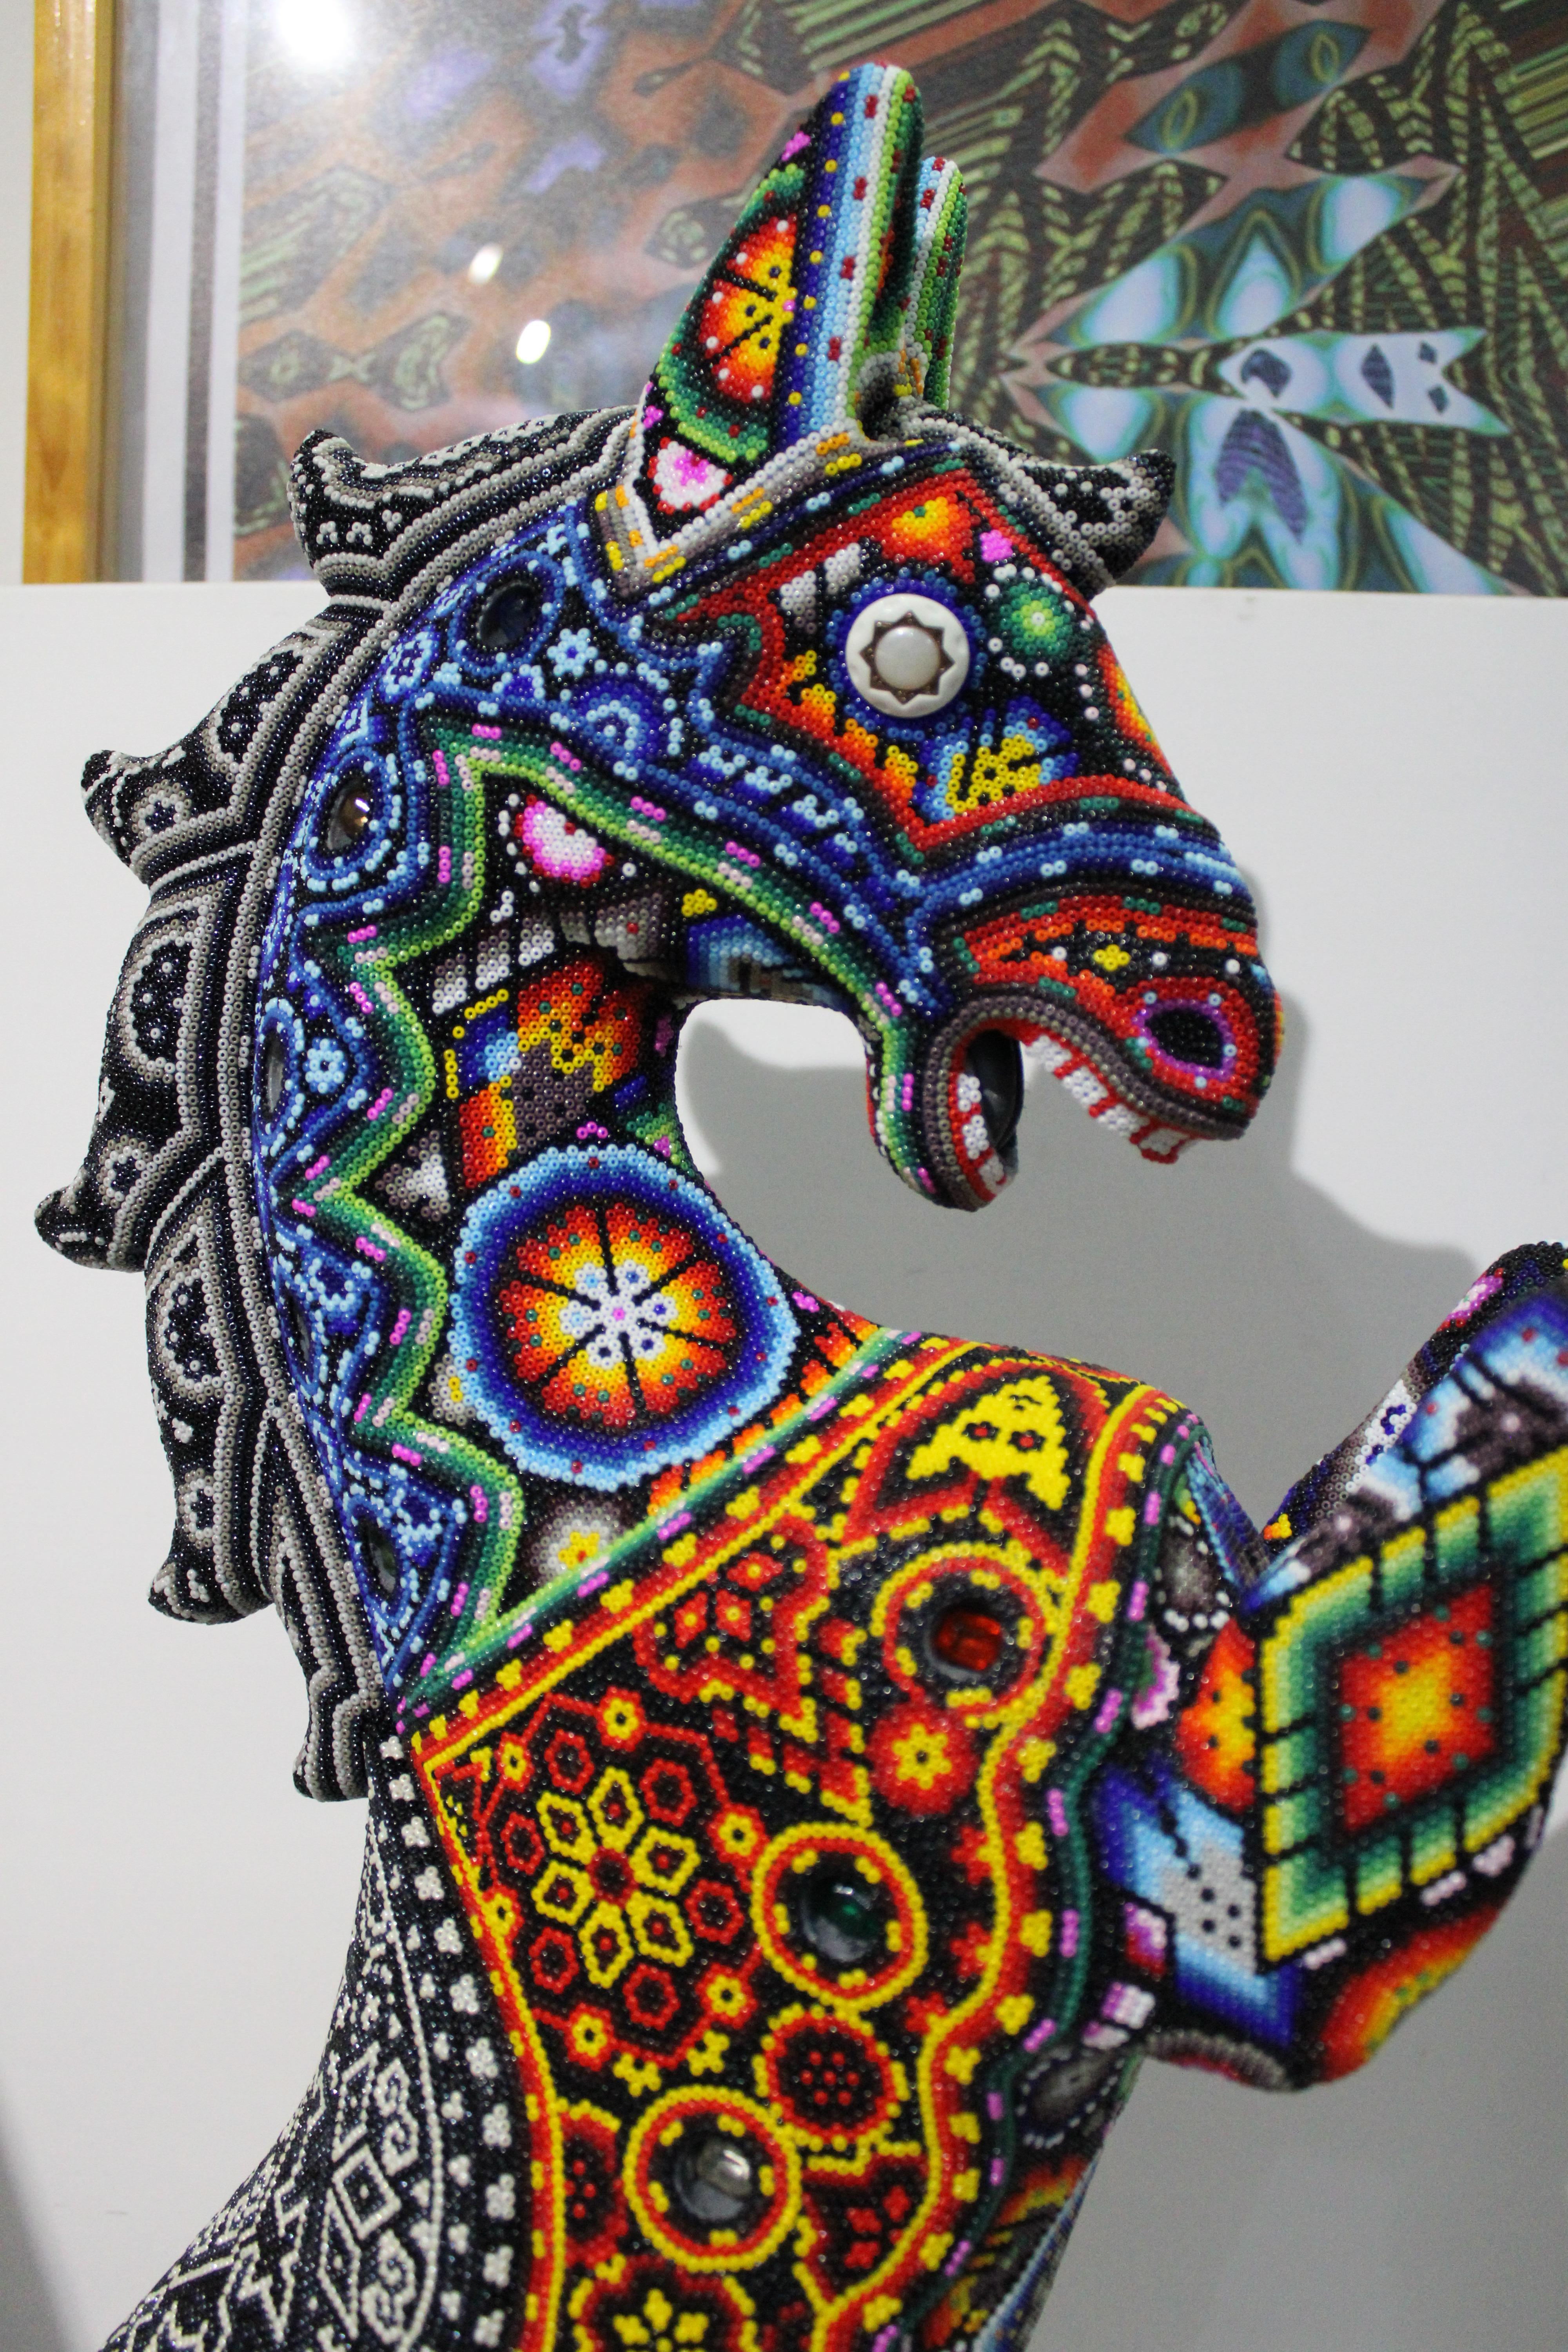 CHROMA aka Rick Wolfryd  Abstract Sculpture - "Carousel" from Huichol Alteration Series 